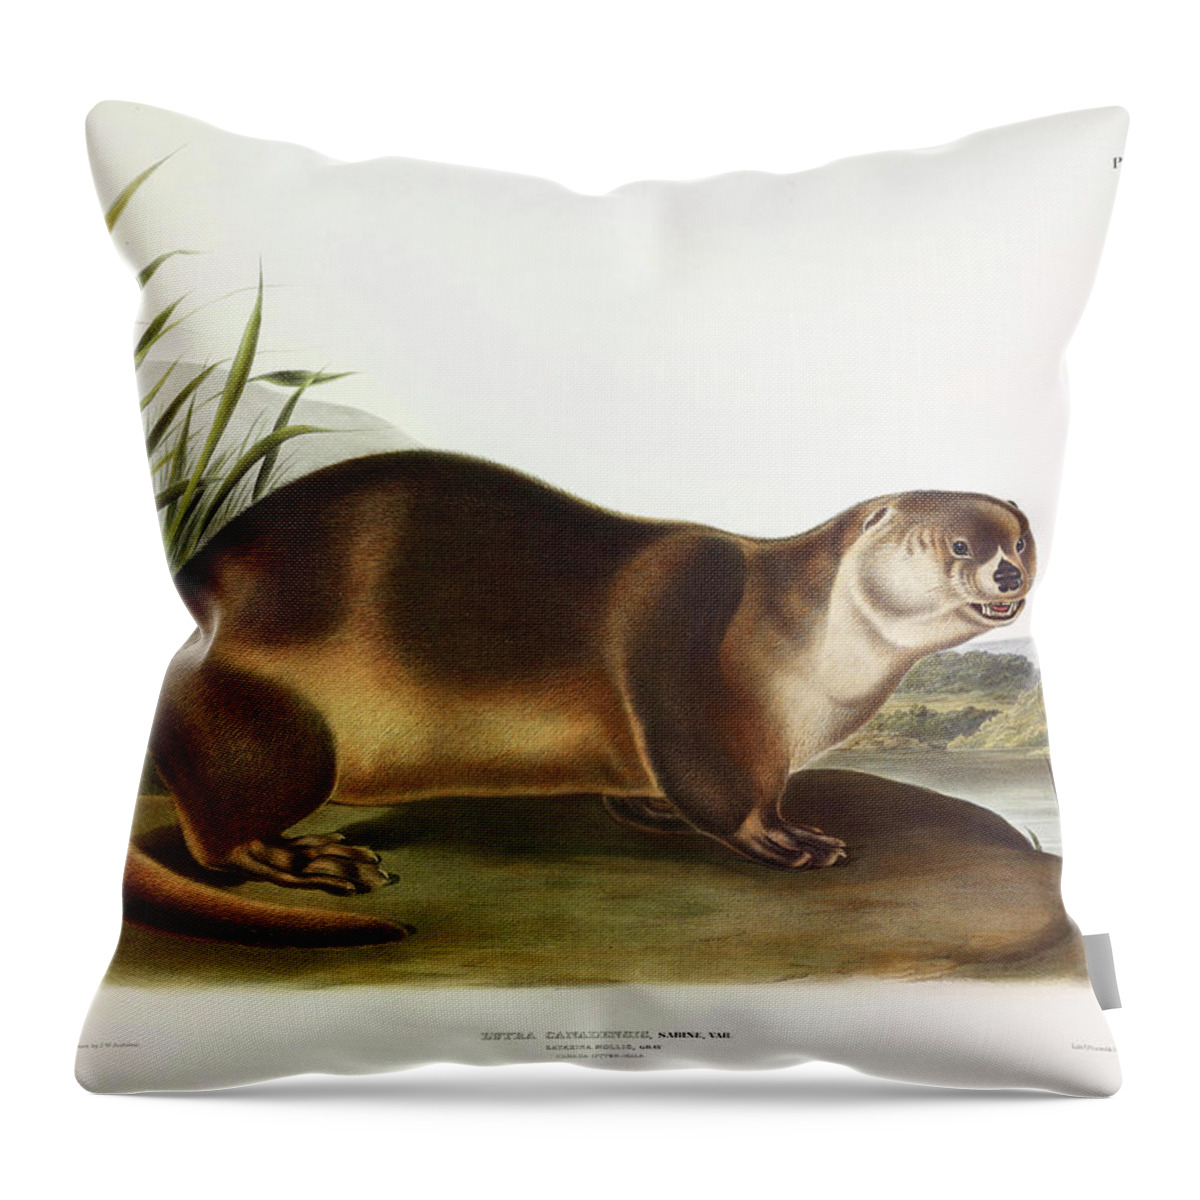 Canada Otter Throw Pillow featuring the painting Canada Otter by John James Audubon